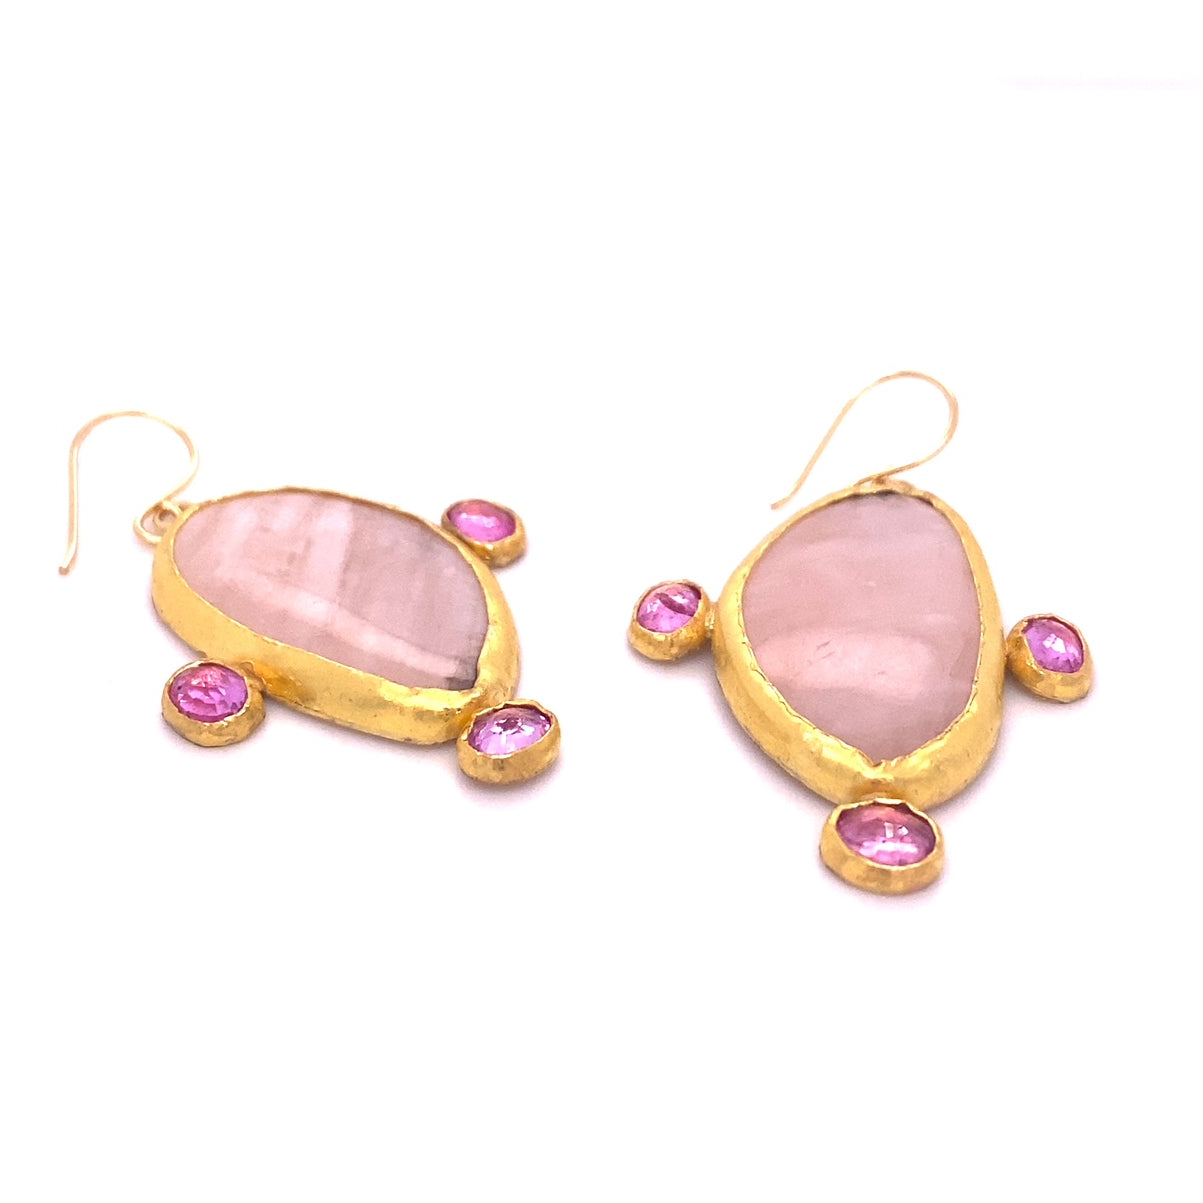 Pink chaledony and sapphire earrings